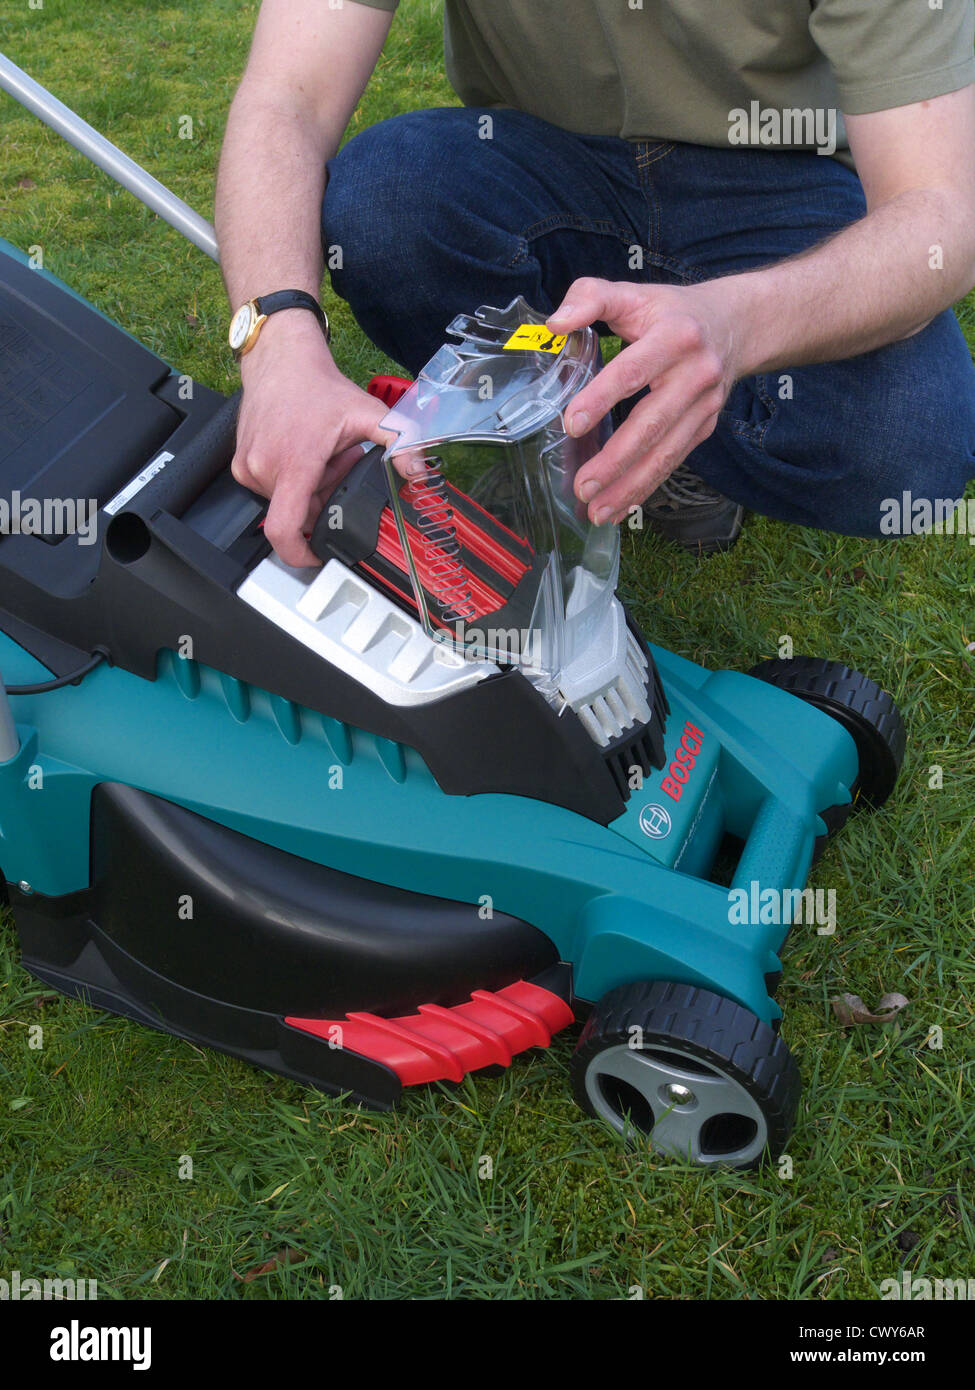 Caucasian Man Changing a Rechargeable Battery on a Bosch Rotak Rechargeable  Lawnmower MODEL RELEASED Stock Photo - Alamy